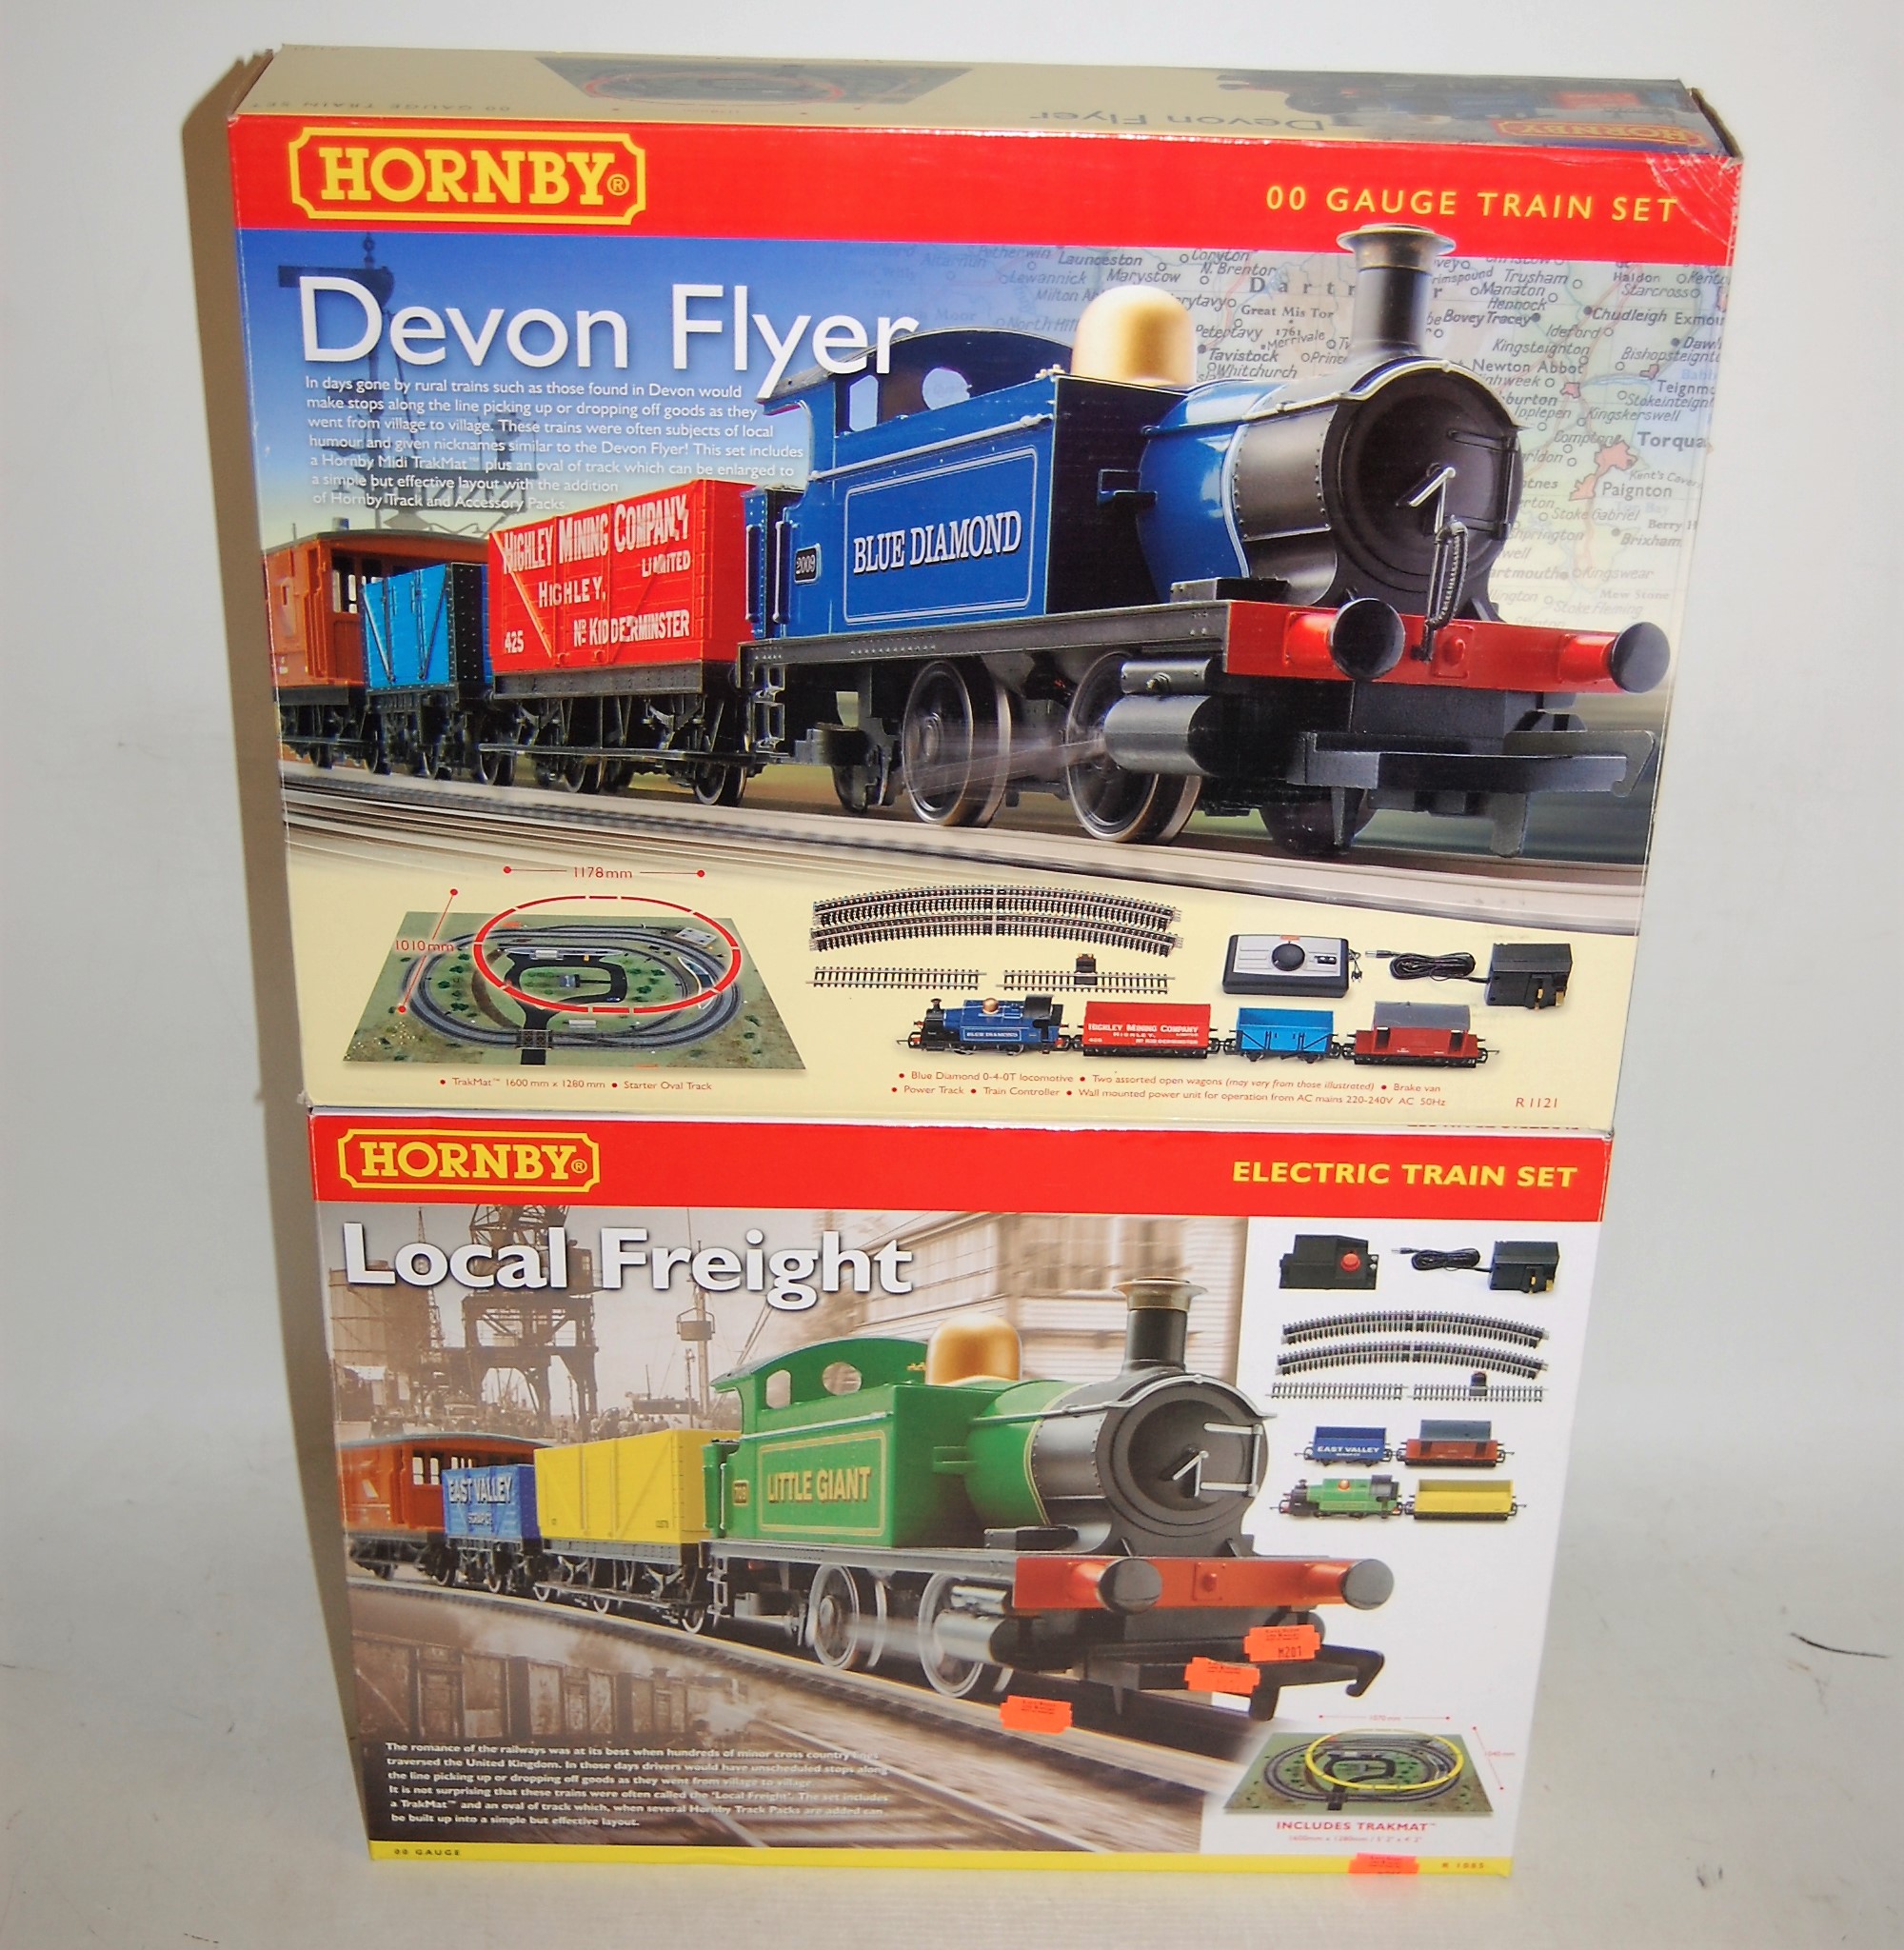 A boxed Hornby local freight electric train set (with incorrect loco and no transformer) together